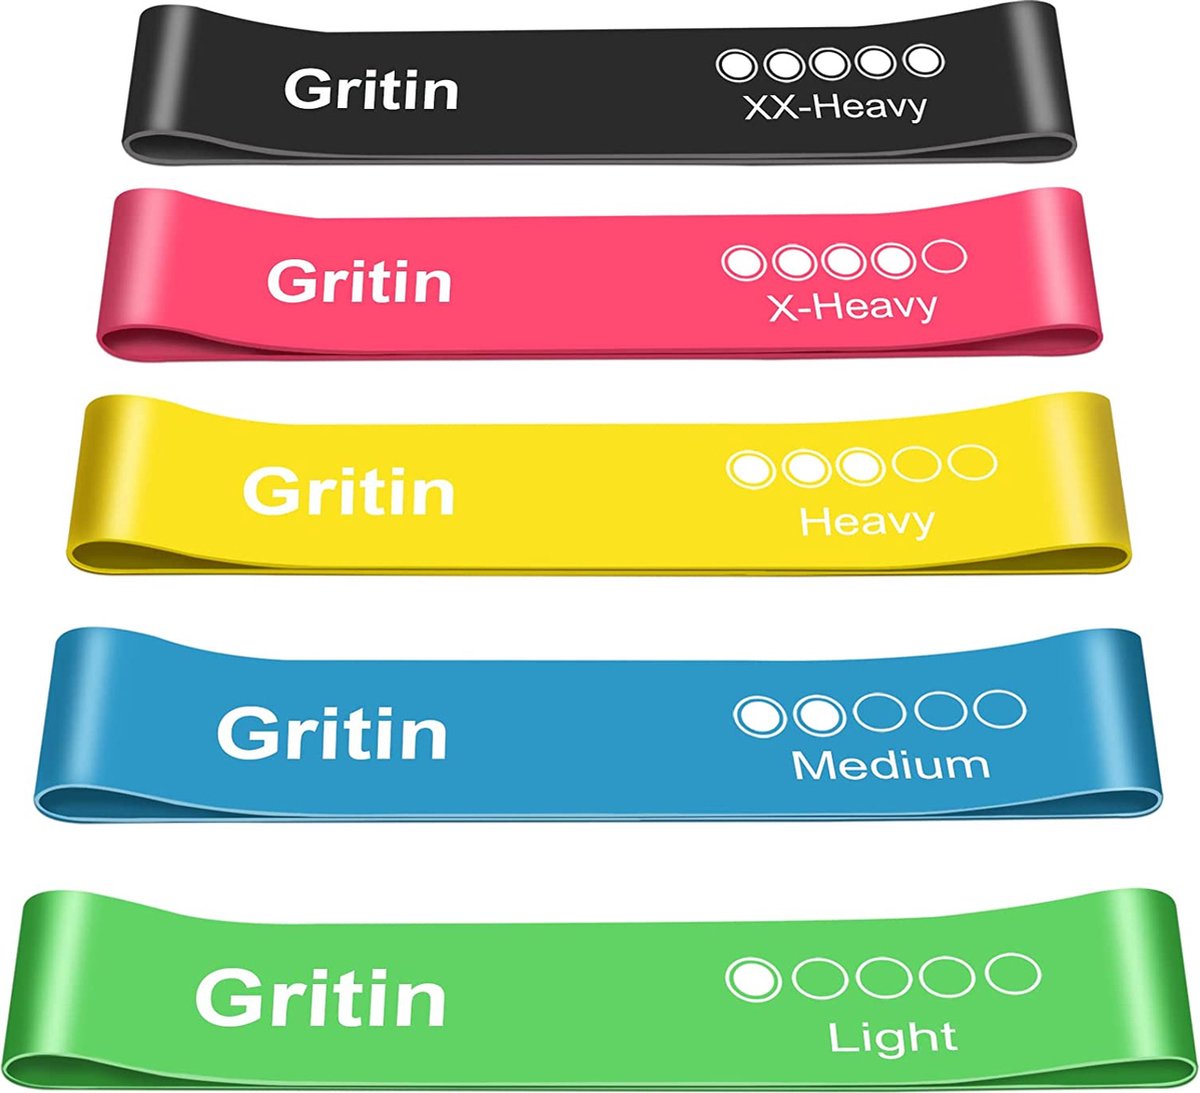 Gritin Resistance Bands, [Set of 5] Skin-Friendly Resistance Fitness Exercise Loop Bands with 5 Different Resistance Levels - Carrying Case Included - Ideal for Home, Gym, Yoga, Training